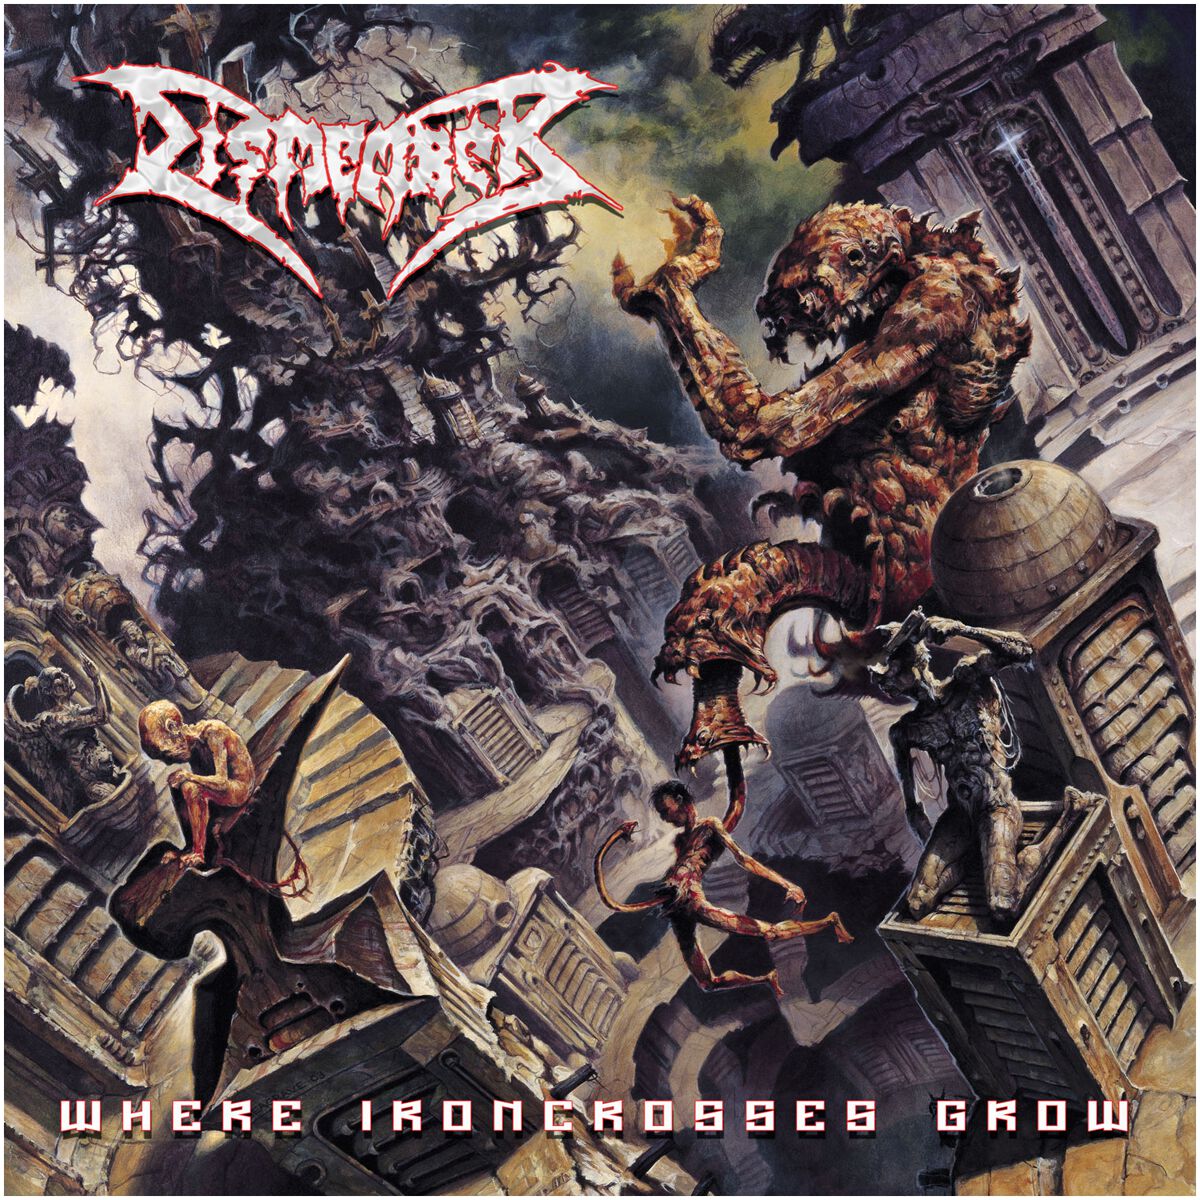 Dismember Where ironcrosses grow CD multicolor